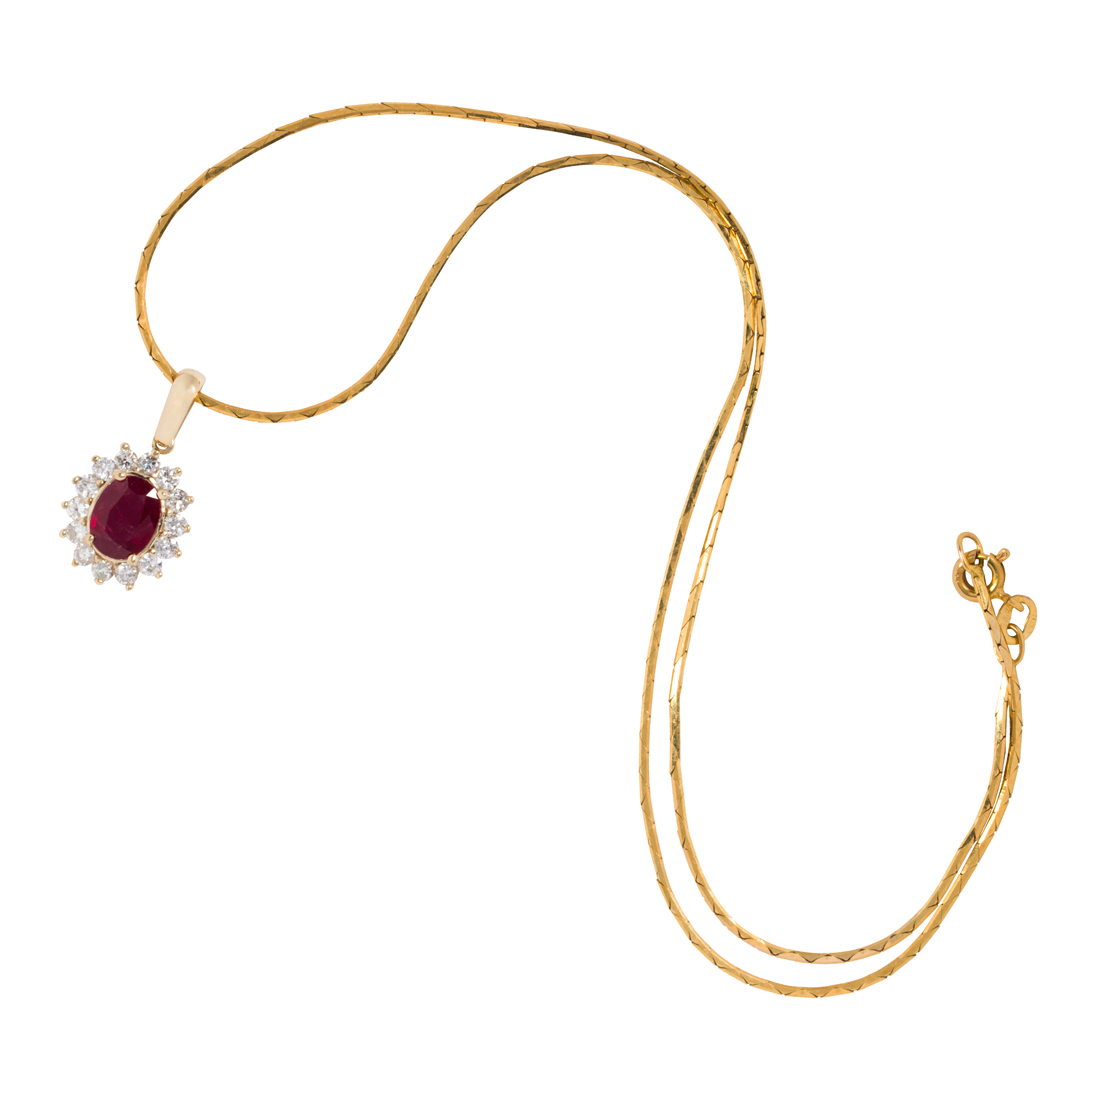 A RUBY DIAMOND AND 14K GOLD NECKLACE 3ce25d